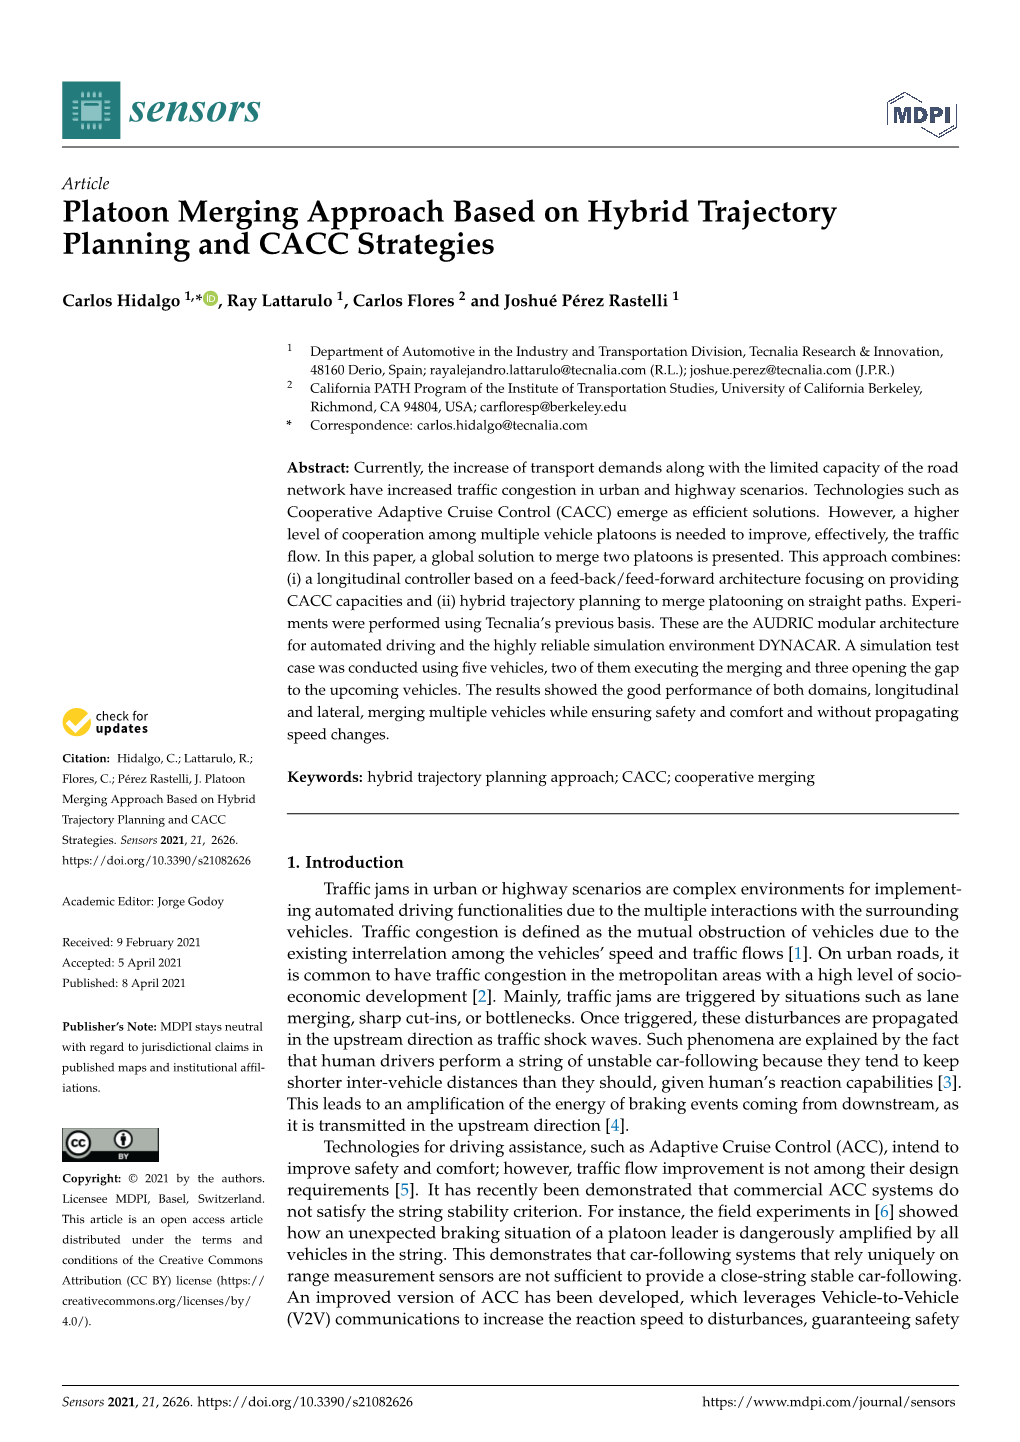 Platoon Merging Approach Based on Hybrid Trajectory Planning and CACC Strategies